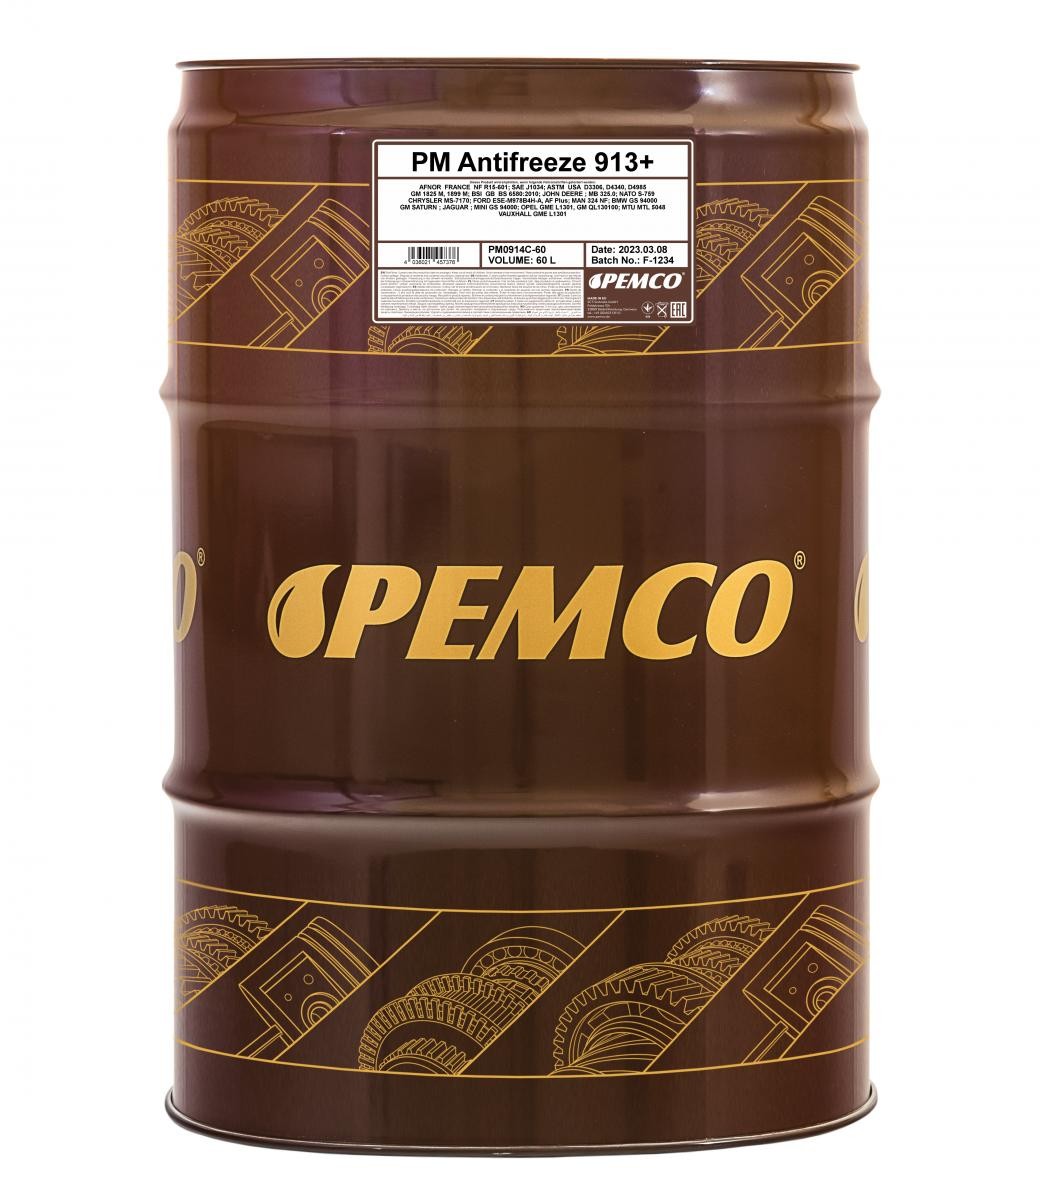 PEMCO Antifreeze 913+, Concentrate PM0914C-60 Antifreeze G13 yellow, 60l, -38(50/50)